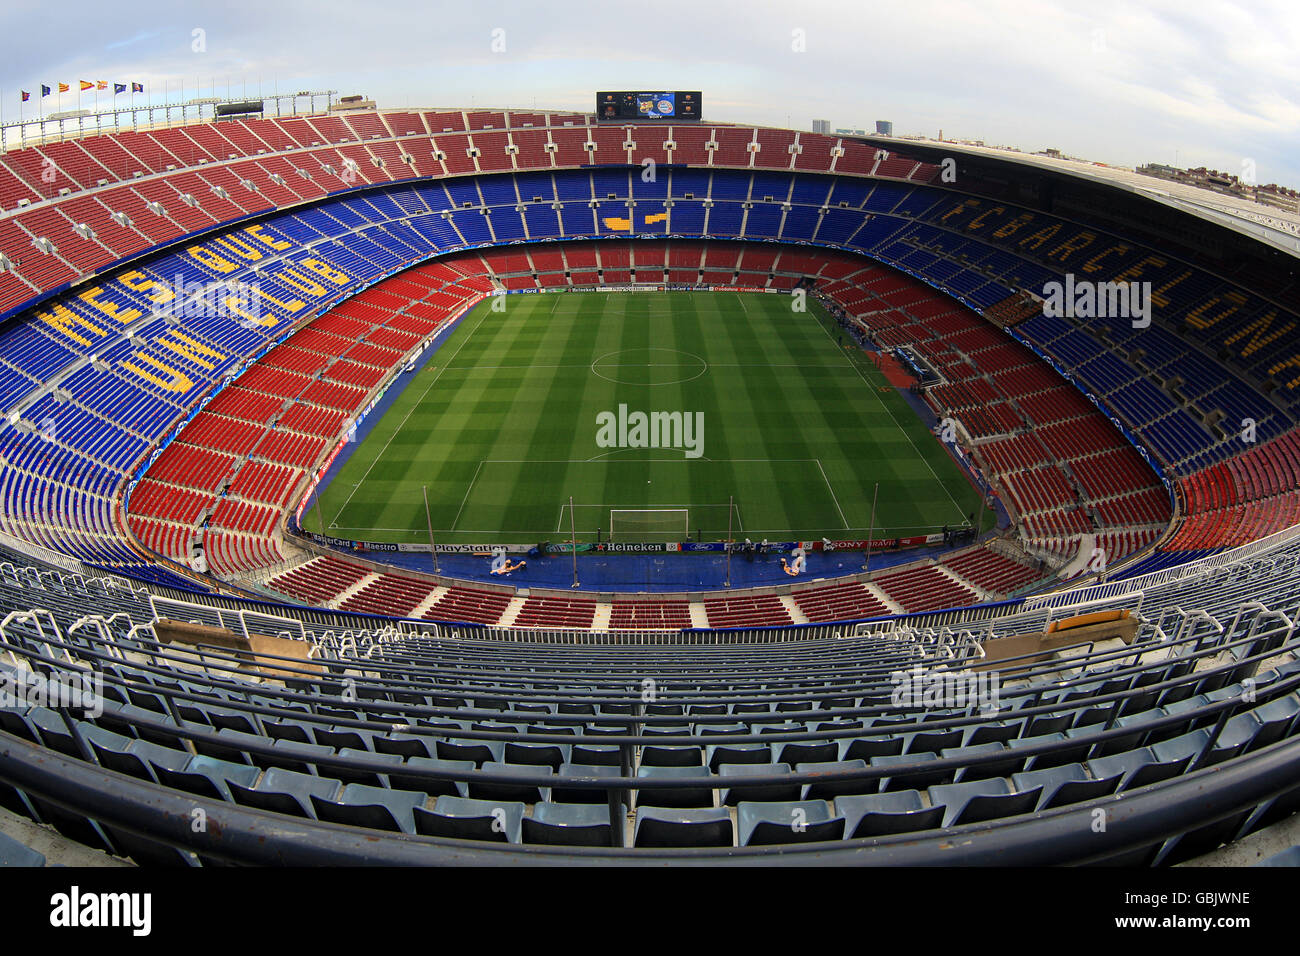 General view of the Estadio Camp Nou, home to Barcelona Football Club. Stock Photo